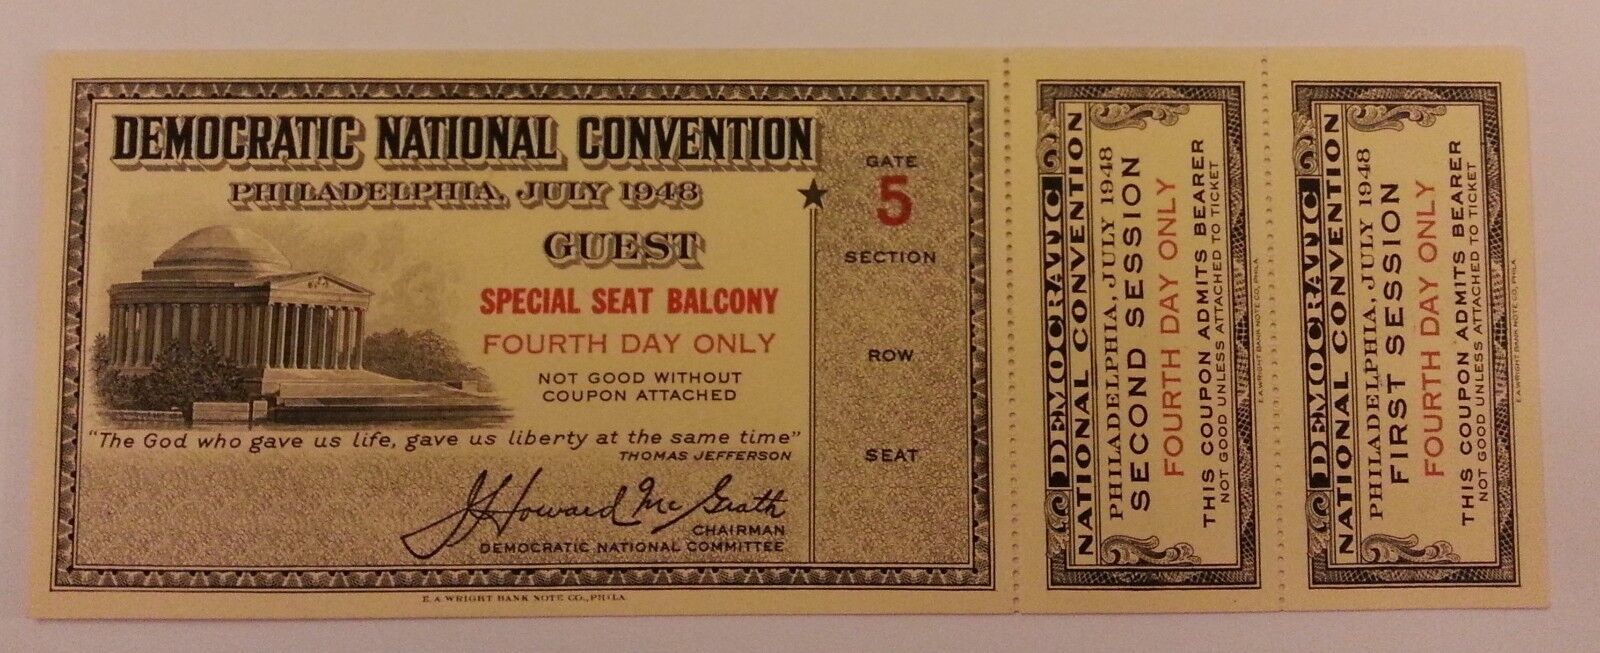 1948 DEMOCRATIC NATIONAL CONVENTION TICKET w/2 coupons Philadelphia PA 